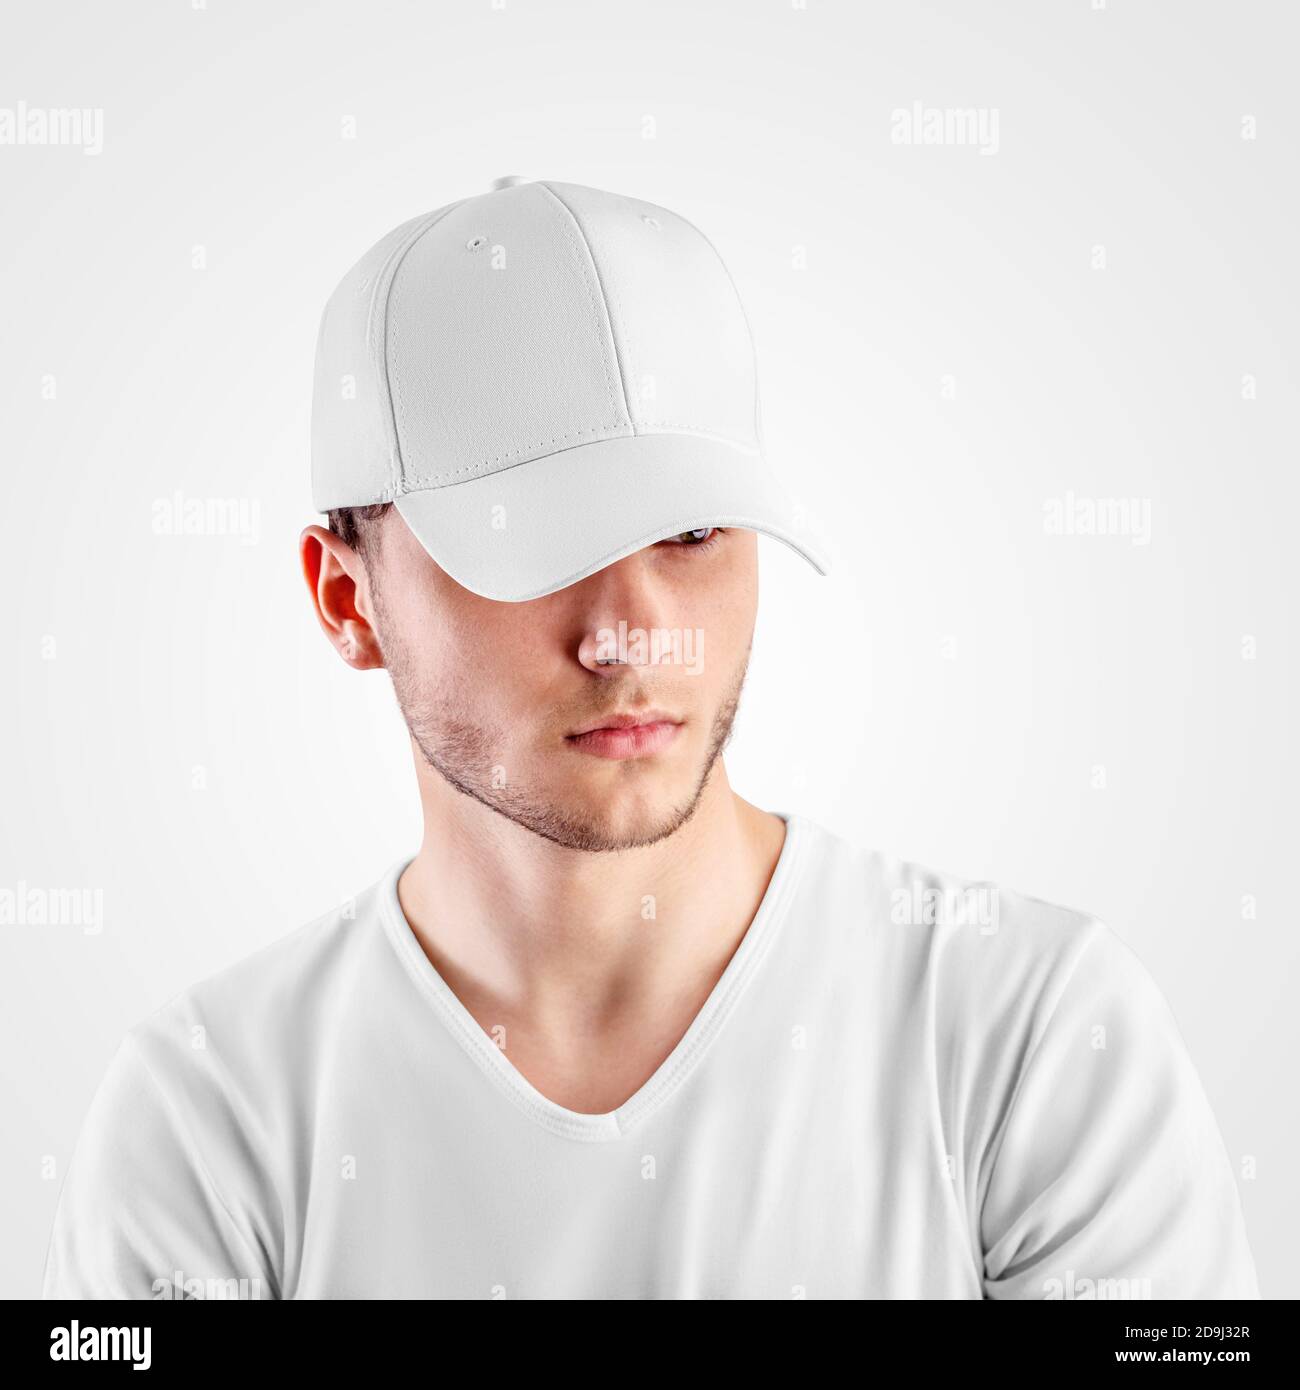 Template of a white baseball cap on a guy's head, headdress for protection  from the sun, isolated on background. Sports hat mockup with visor, univers  Stock Photo - Alamy